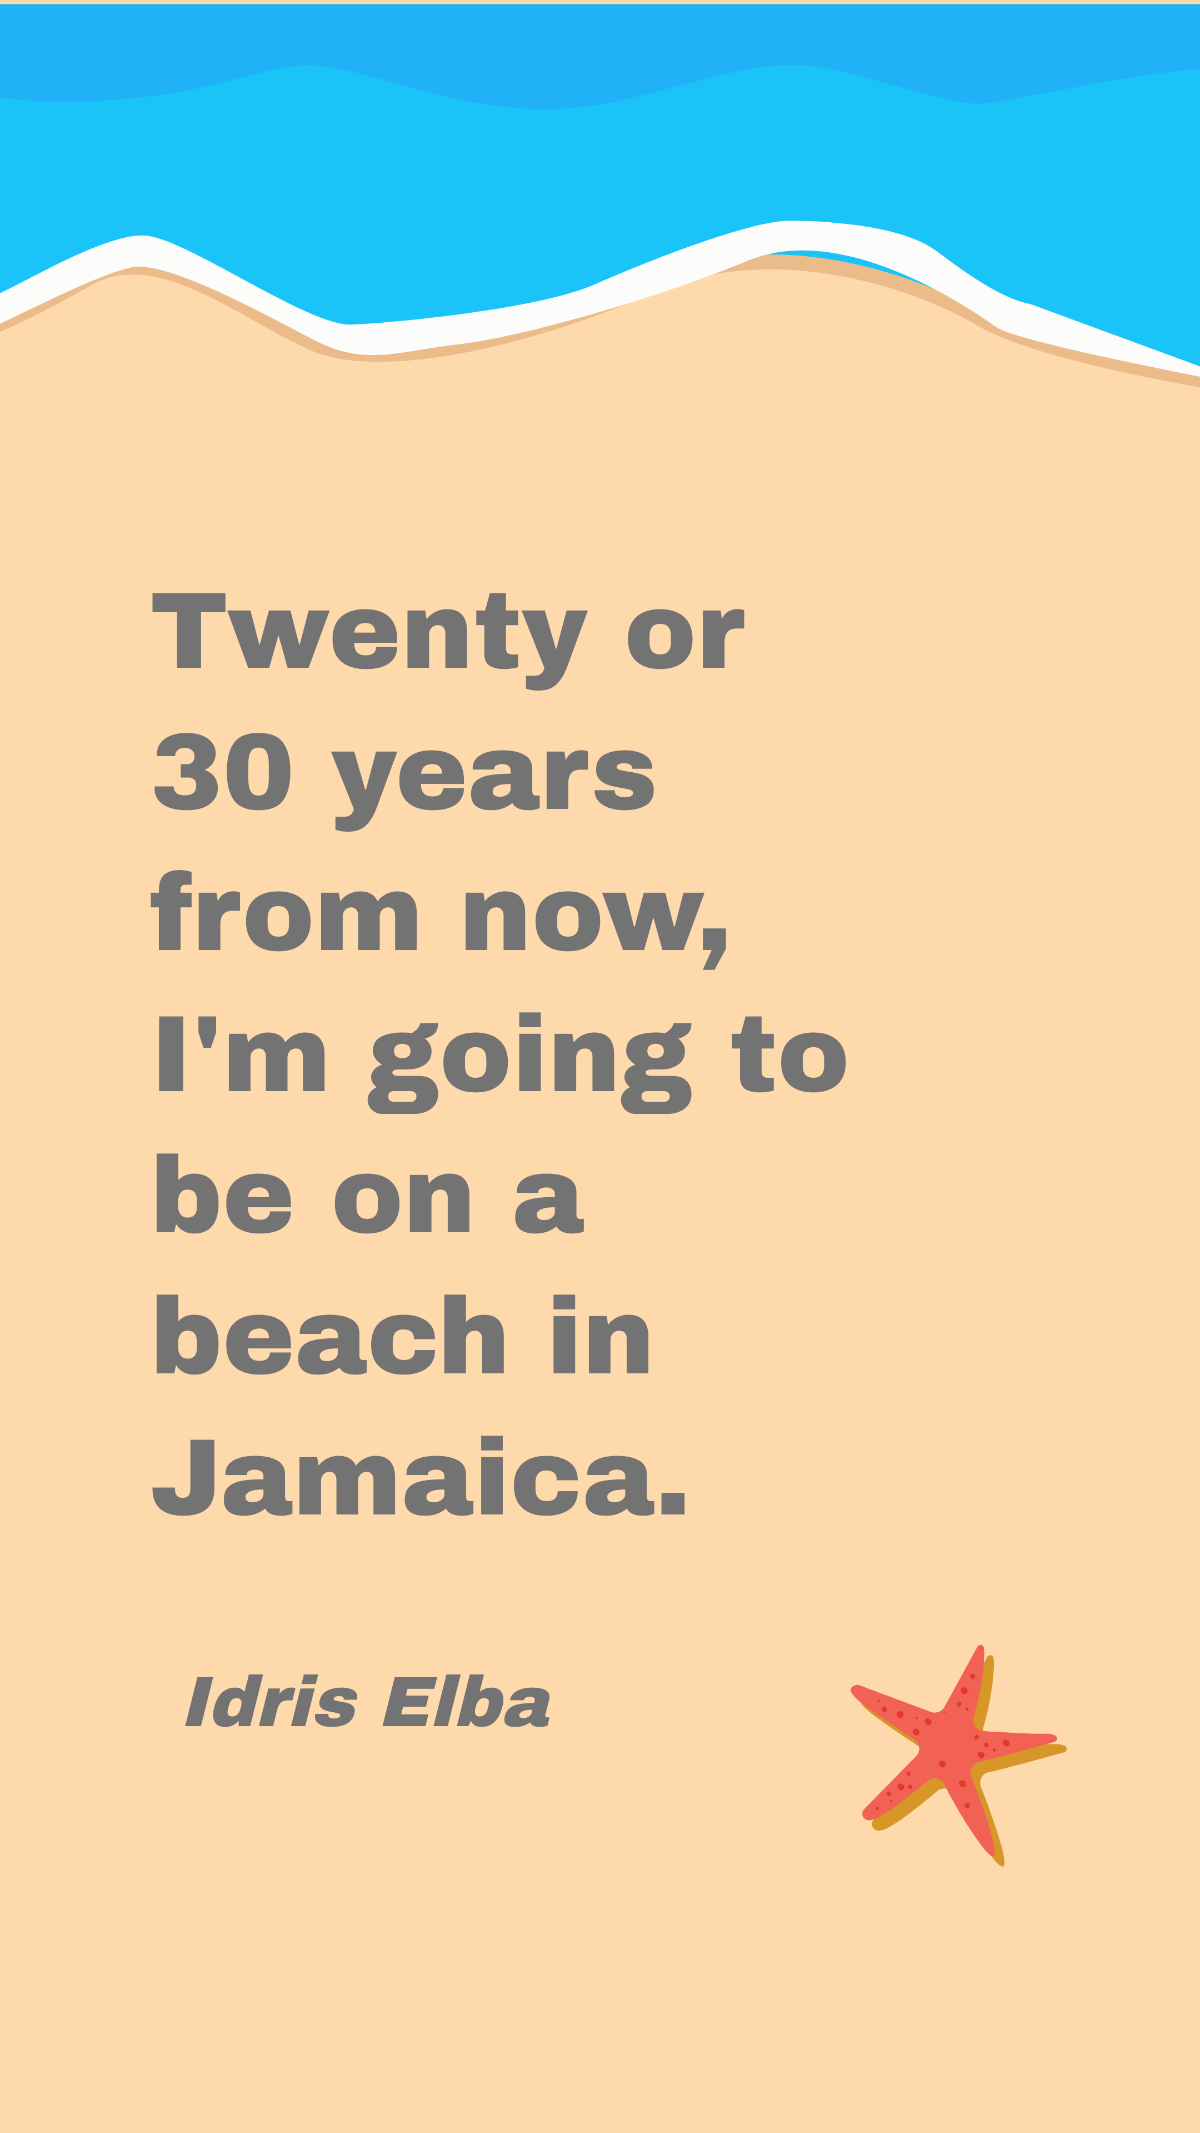 Idris Elba - Twenty or 30 years from now, I'm going to be on a beach in Jamaica.